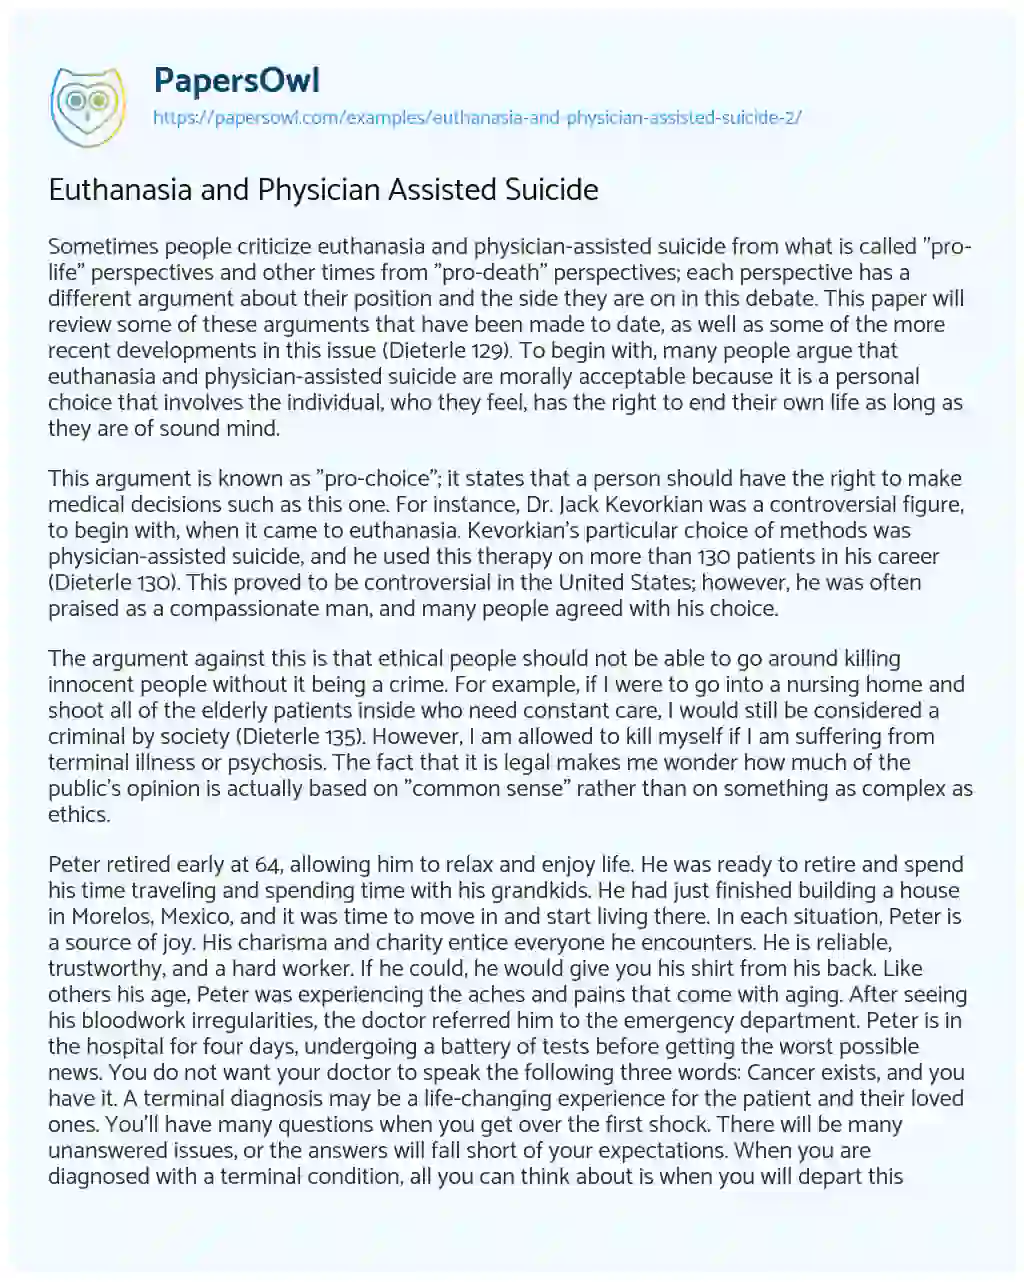 Euthanasia and Physician Assisted Suicide essay